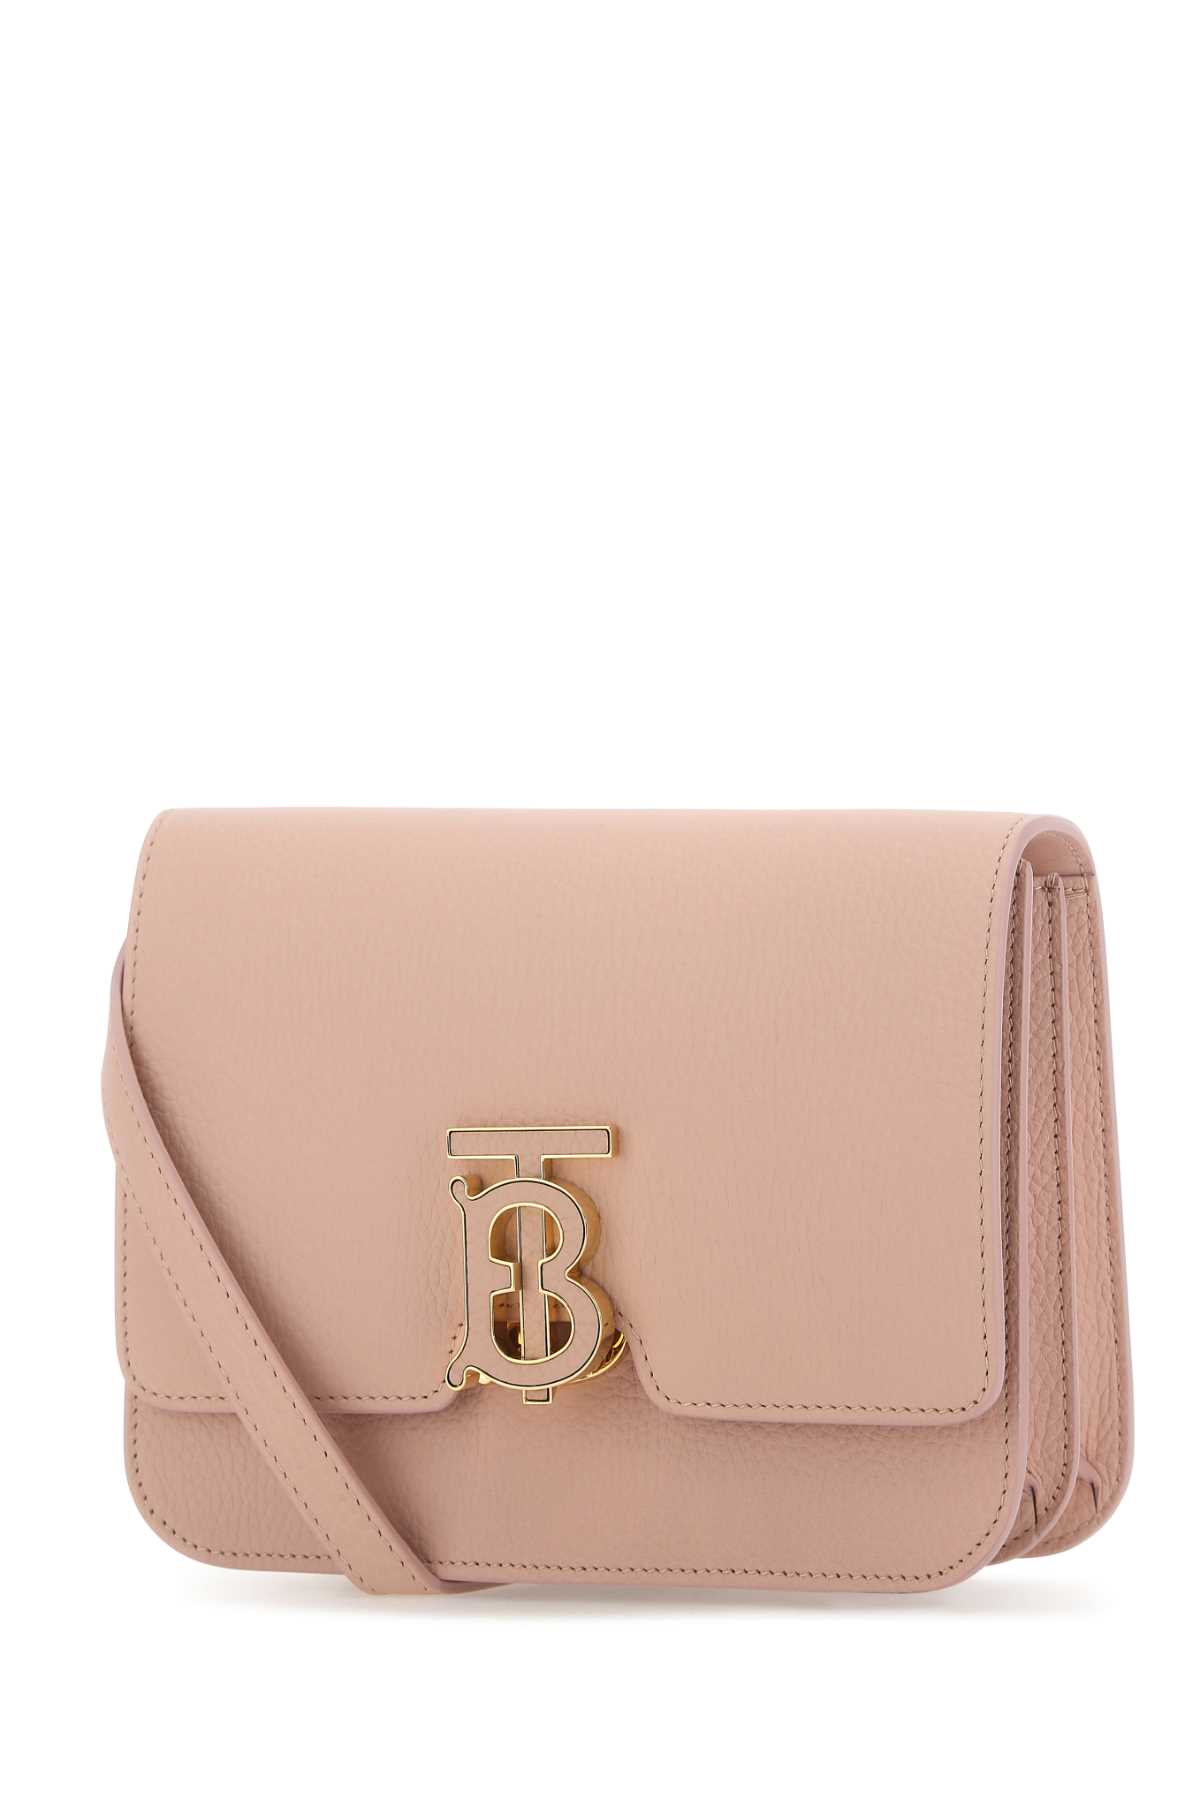 Shop Burberry Pink Leather Small Tb Crossbody Bag In A3661